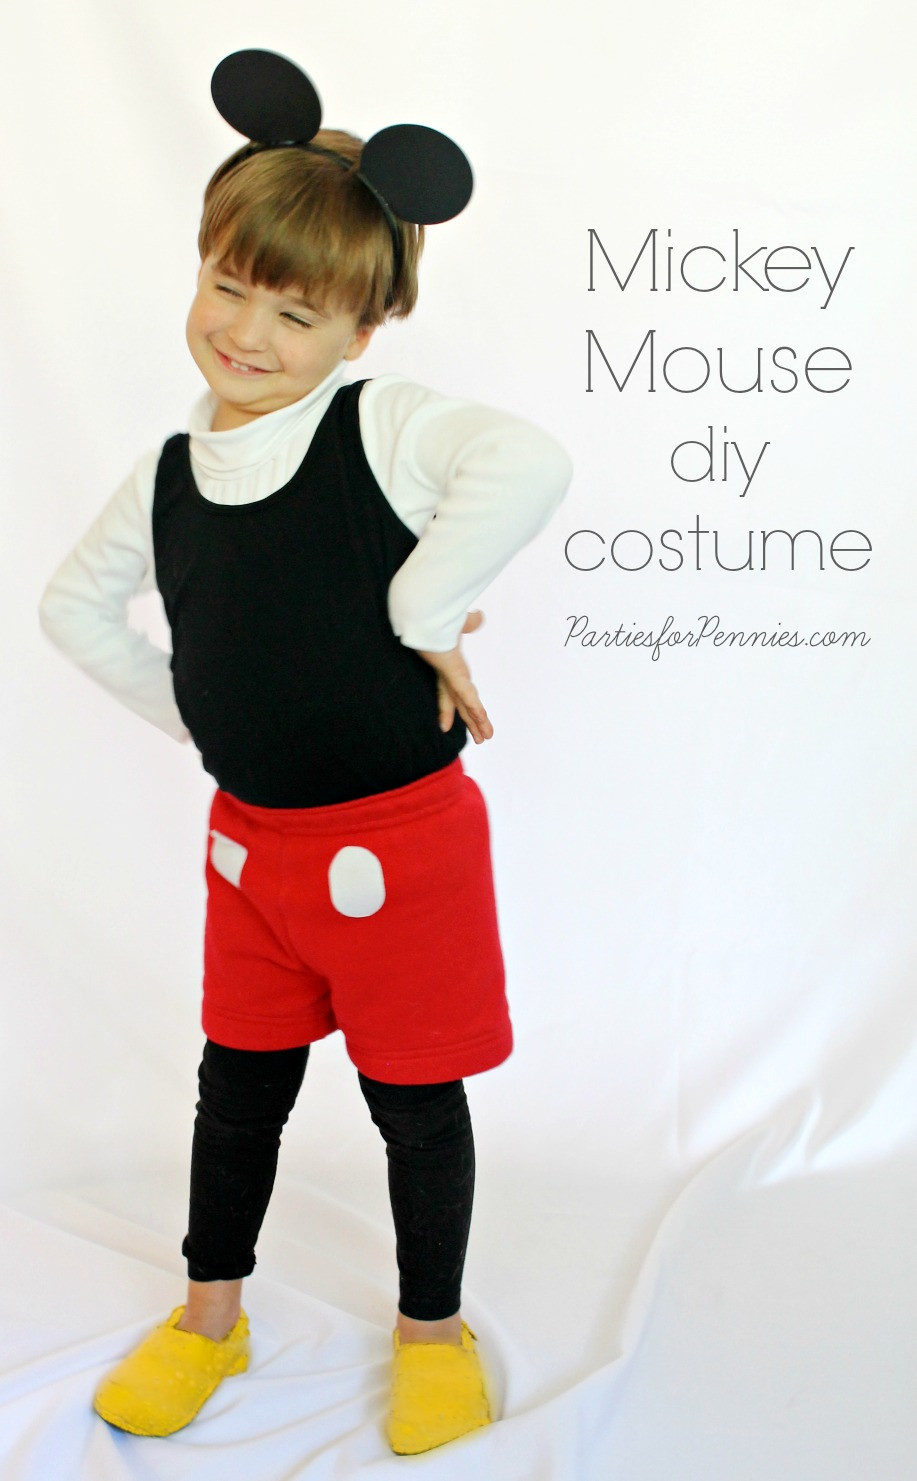 DIY Mouse Costumes
 DIY Cactus Costume Parties for Pennies